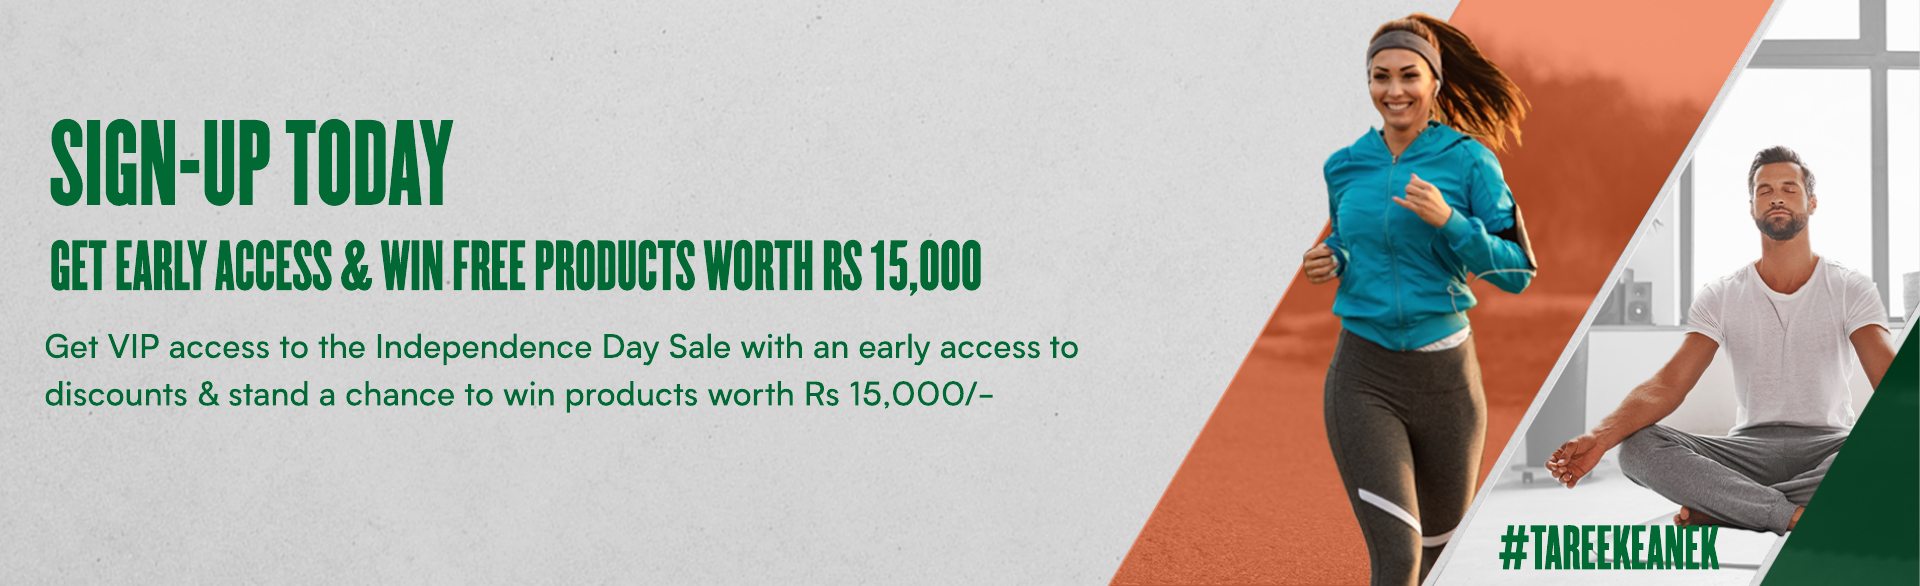 Sign up today to win early access to the Independence Day sale and stand a chance to win products worth Rs. 15,000